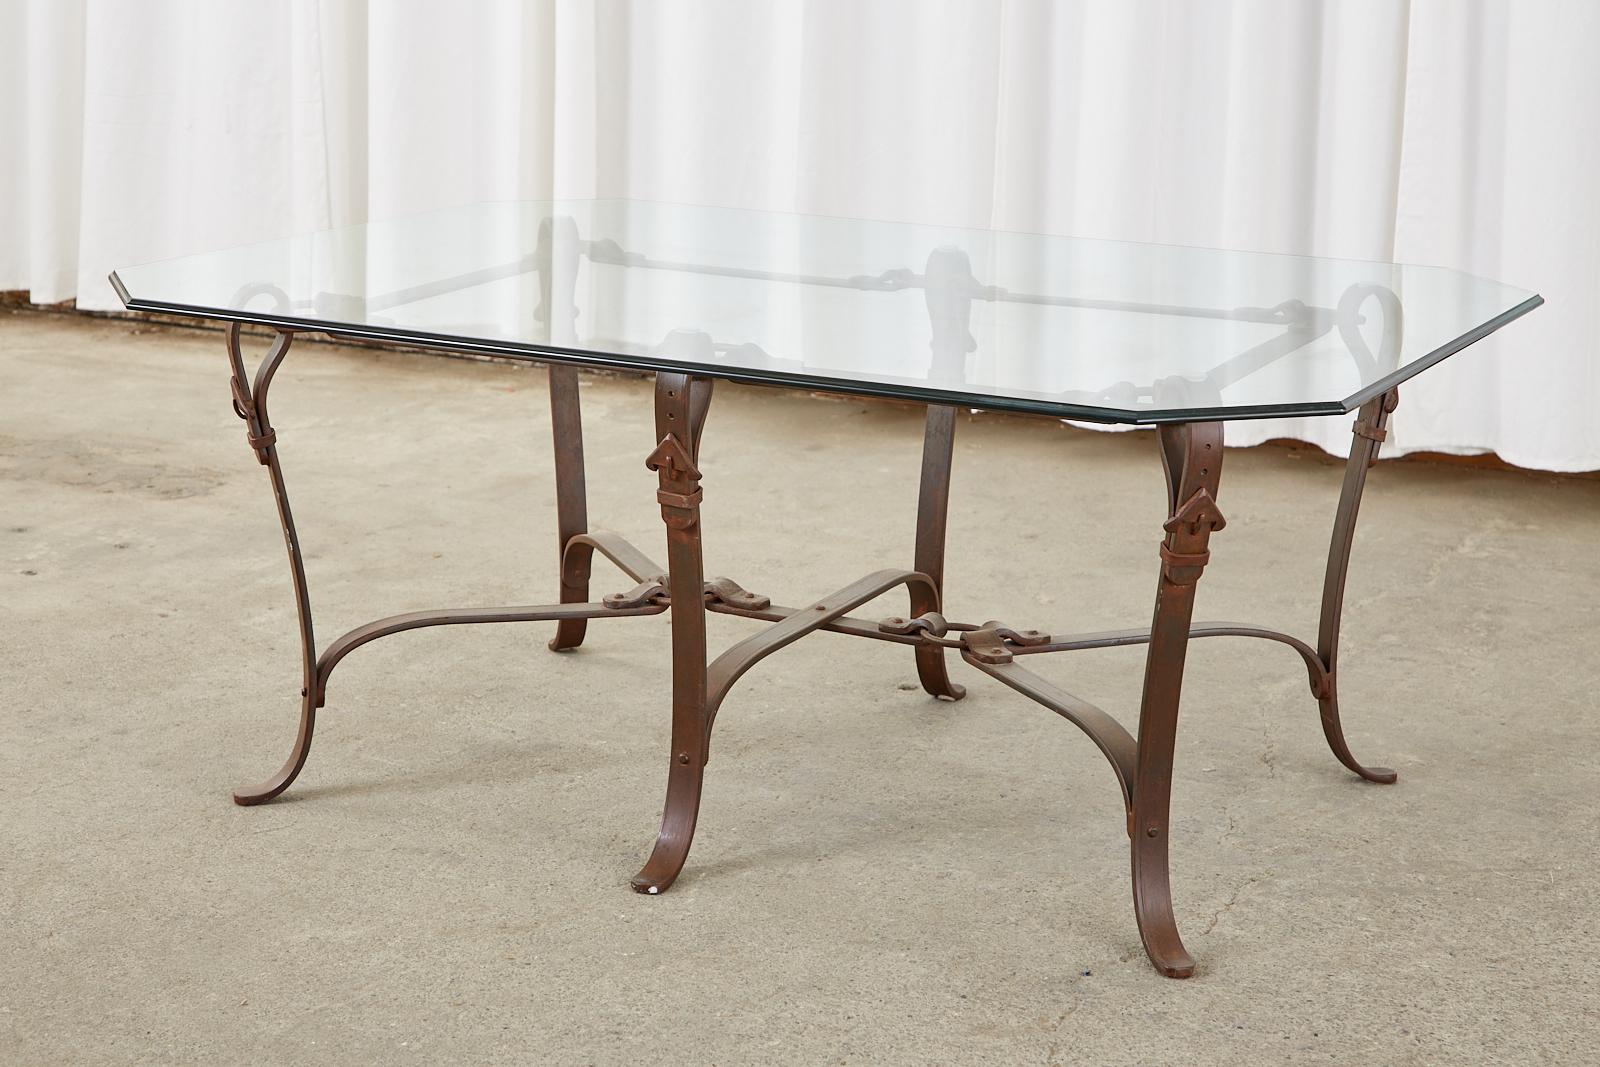 Mid-Century Modern French cast iron coffee or cocktail table featuring a faux leather equestrian strap design in the manner and style of Jacques Adnet and Hermes. The iron frame was beautifully crafted to resemble leather equestrian harness straps,